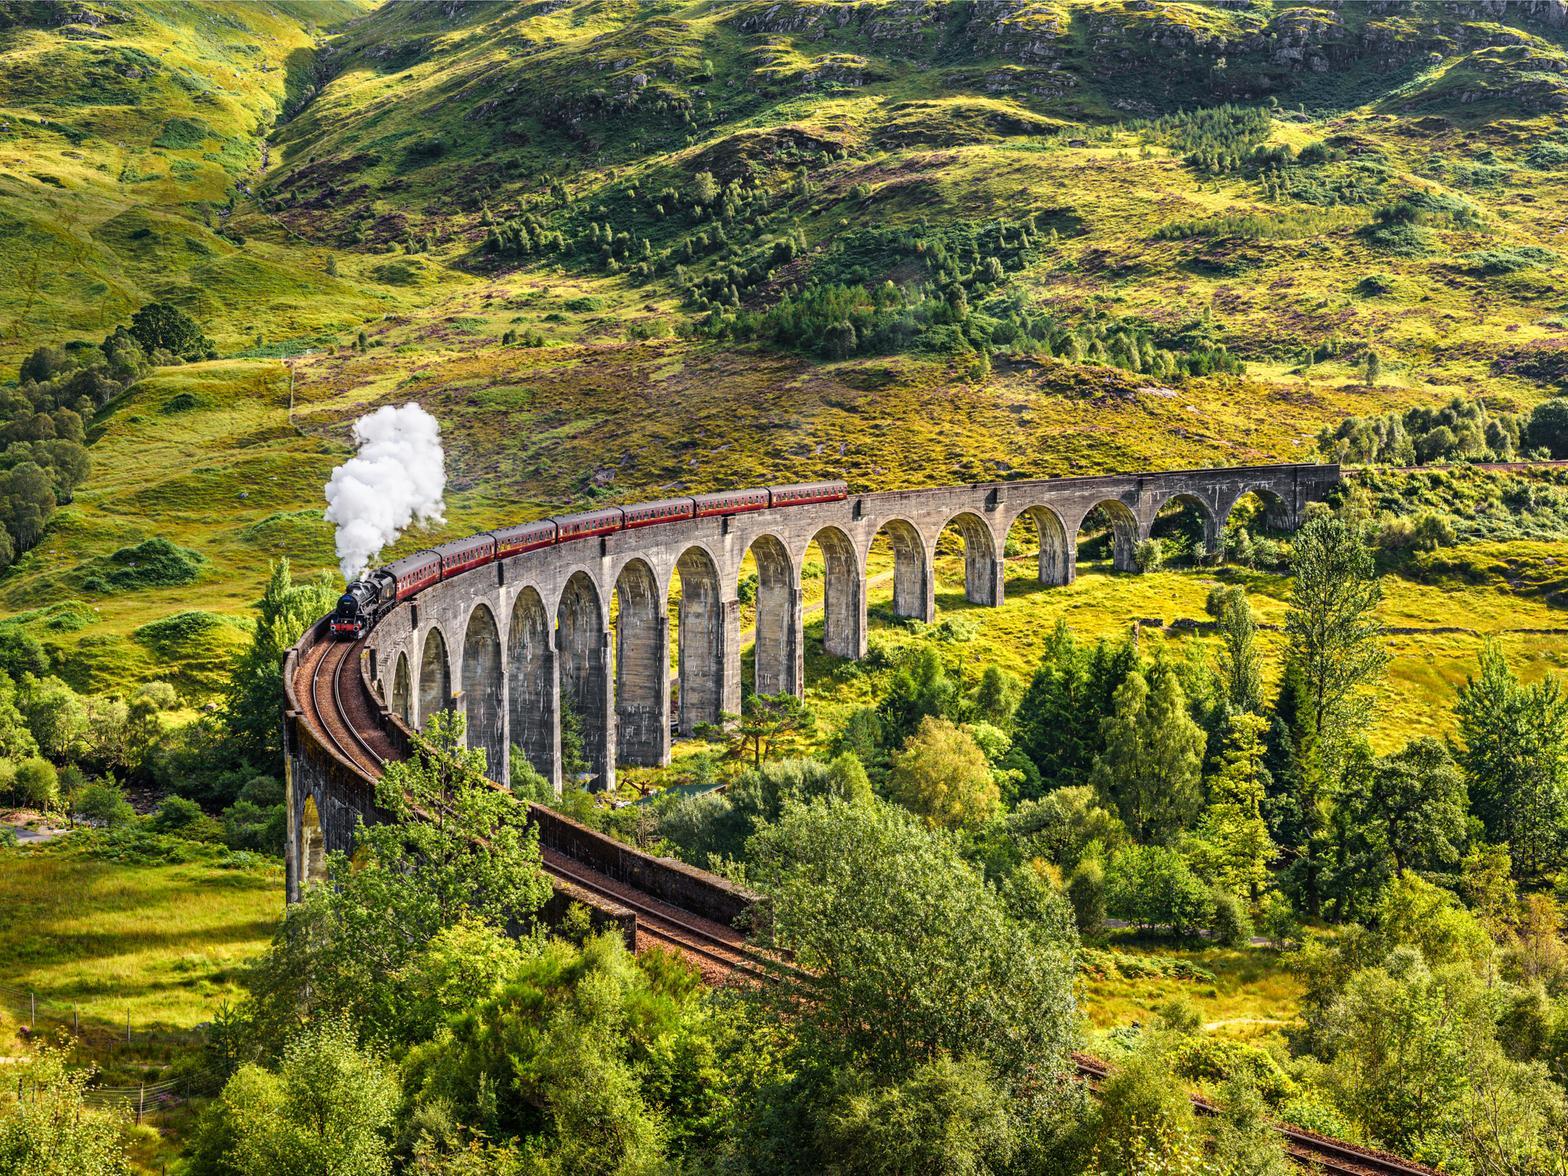 Many people will recognise the Glenfinnan Viaduct as the eye-catching bridge that the Hogwarts Express goes over as it takes Harry Potter and his pals to Hogwarts.